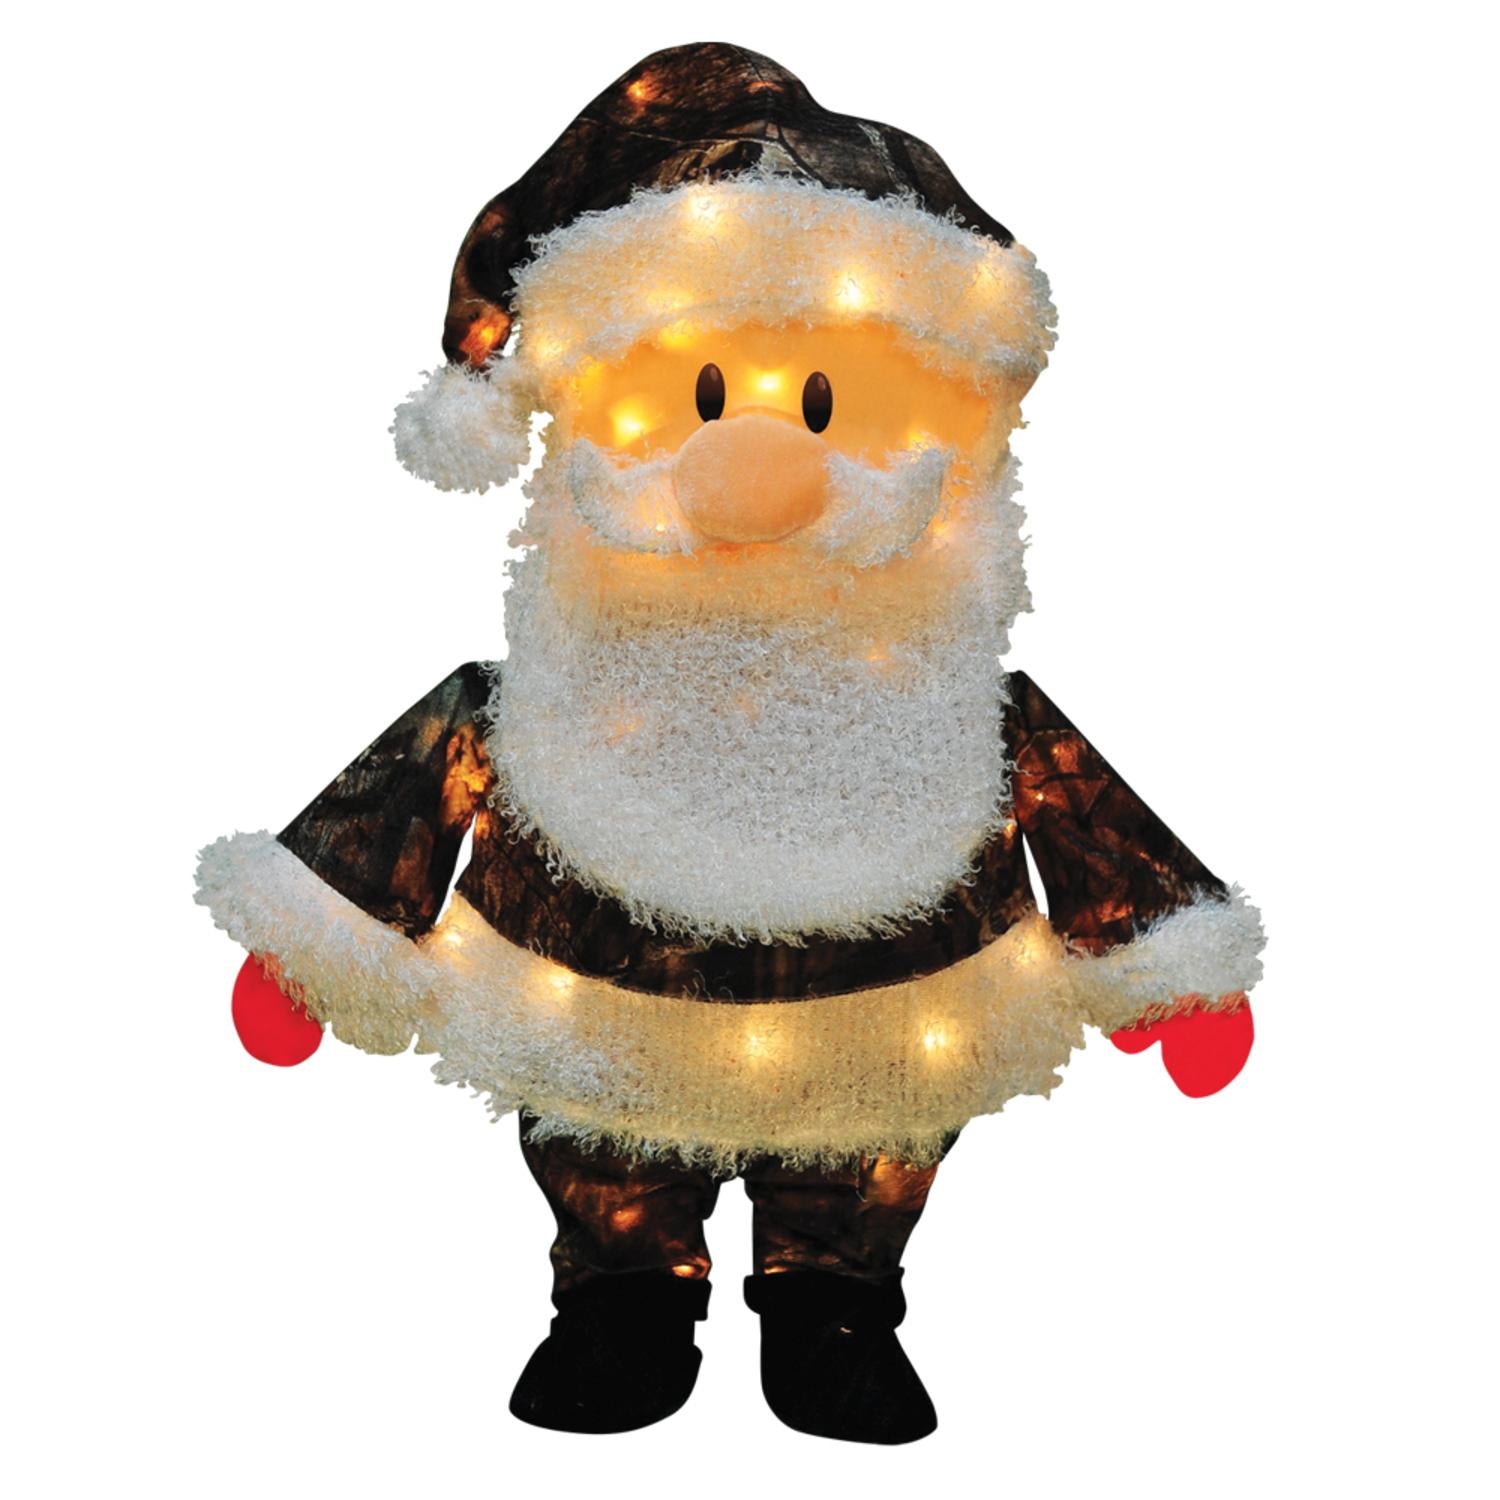 24" Pre-Lit Candy Lane Santa Claus in Camo Christmas Outdoor Decoration - Clear Lights